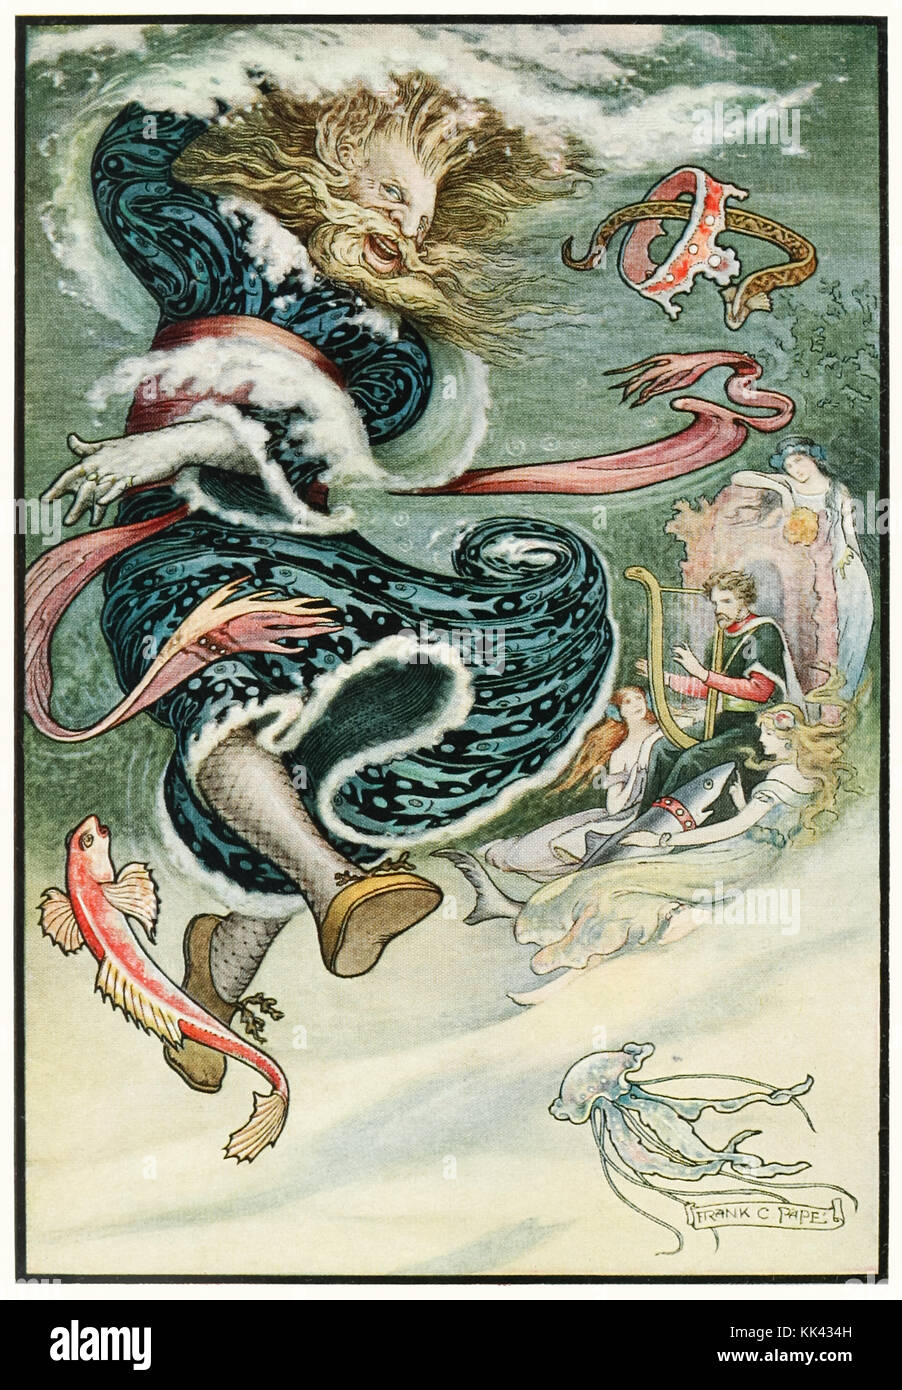 ‘The Water Tsar dances’ from ‘The Russian Story Book’ by Richard Wilson (1878-1916) illustration by Frank C. Papé (1878-1972). See more information below. Stock Photo